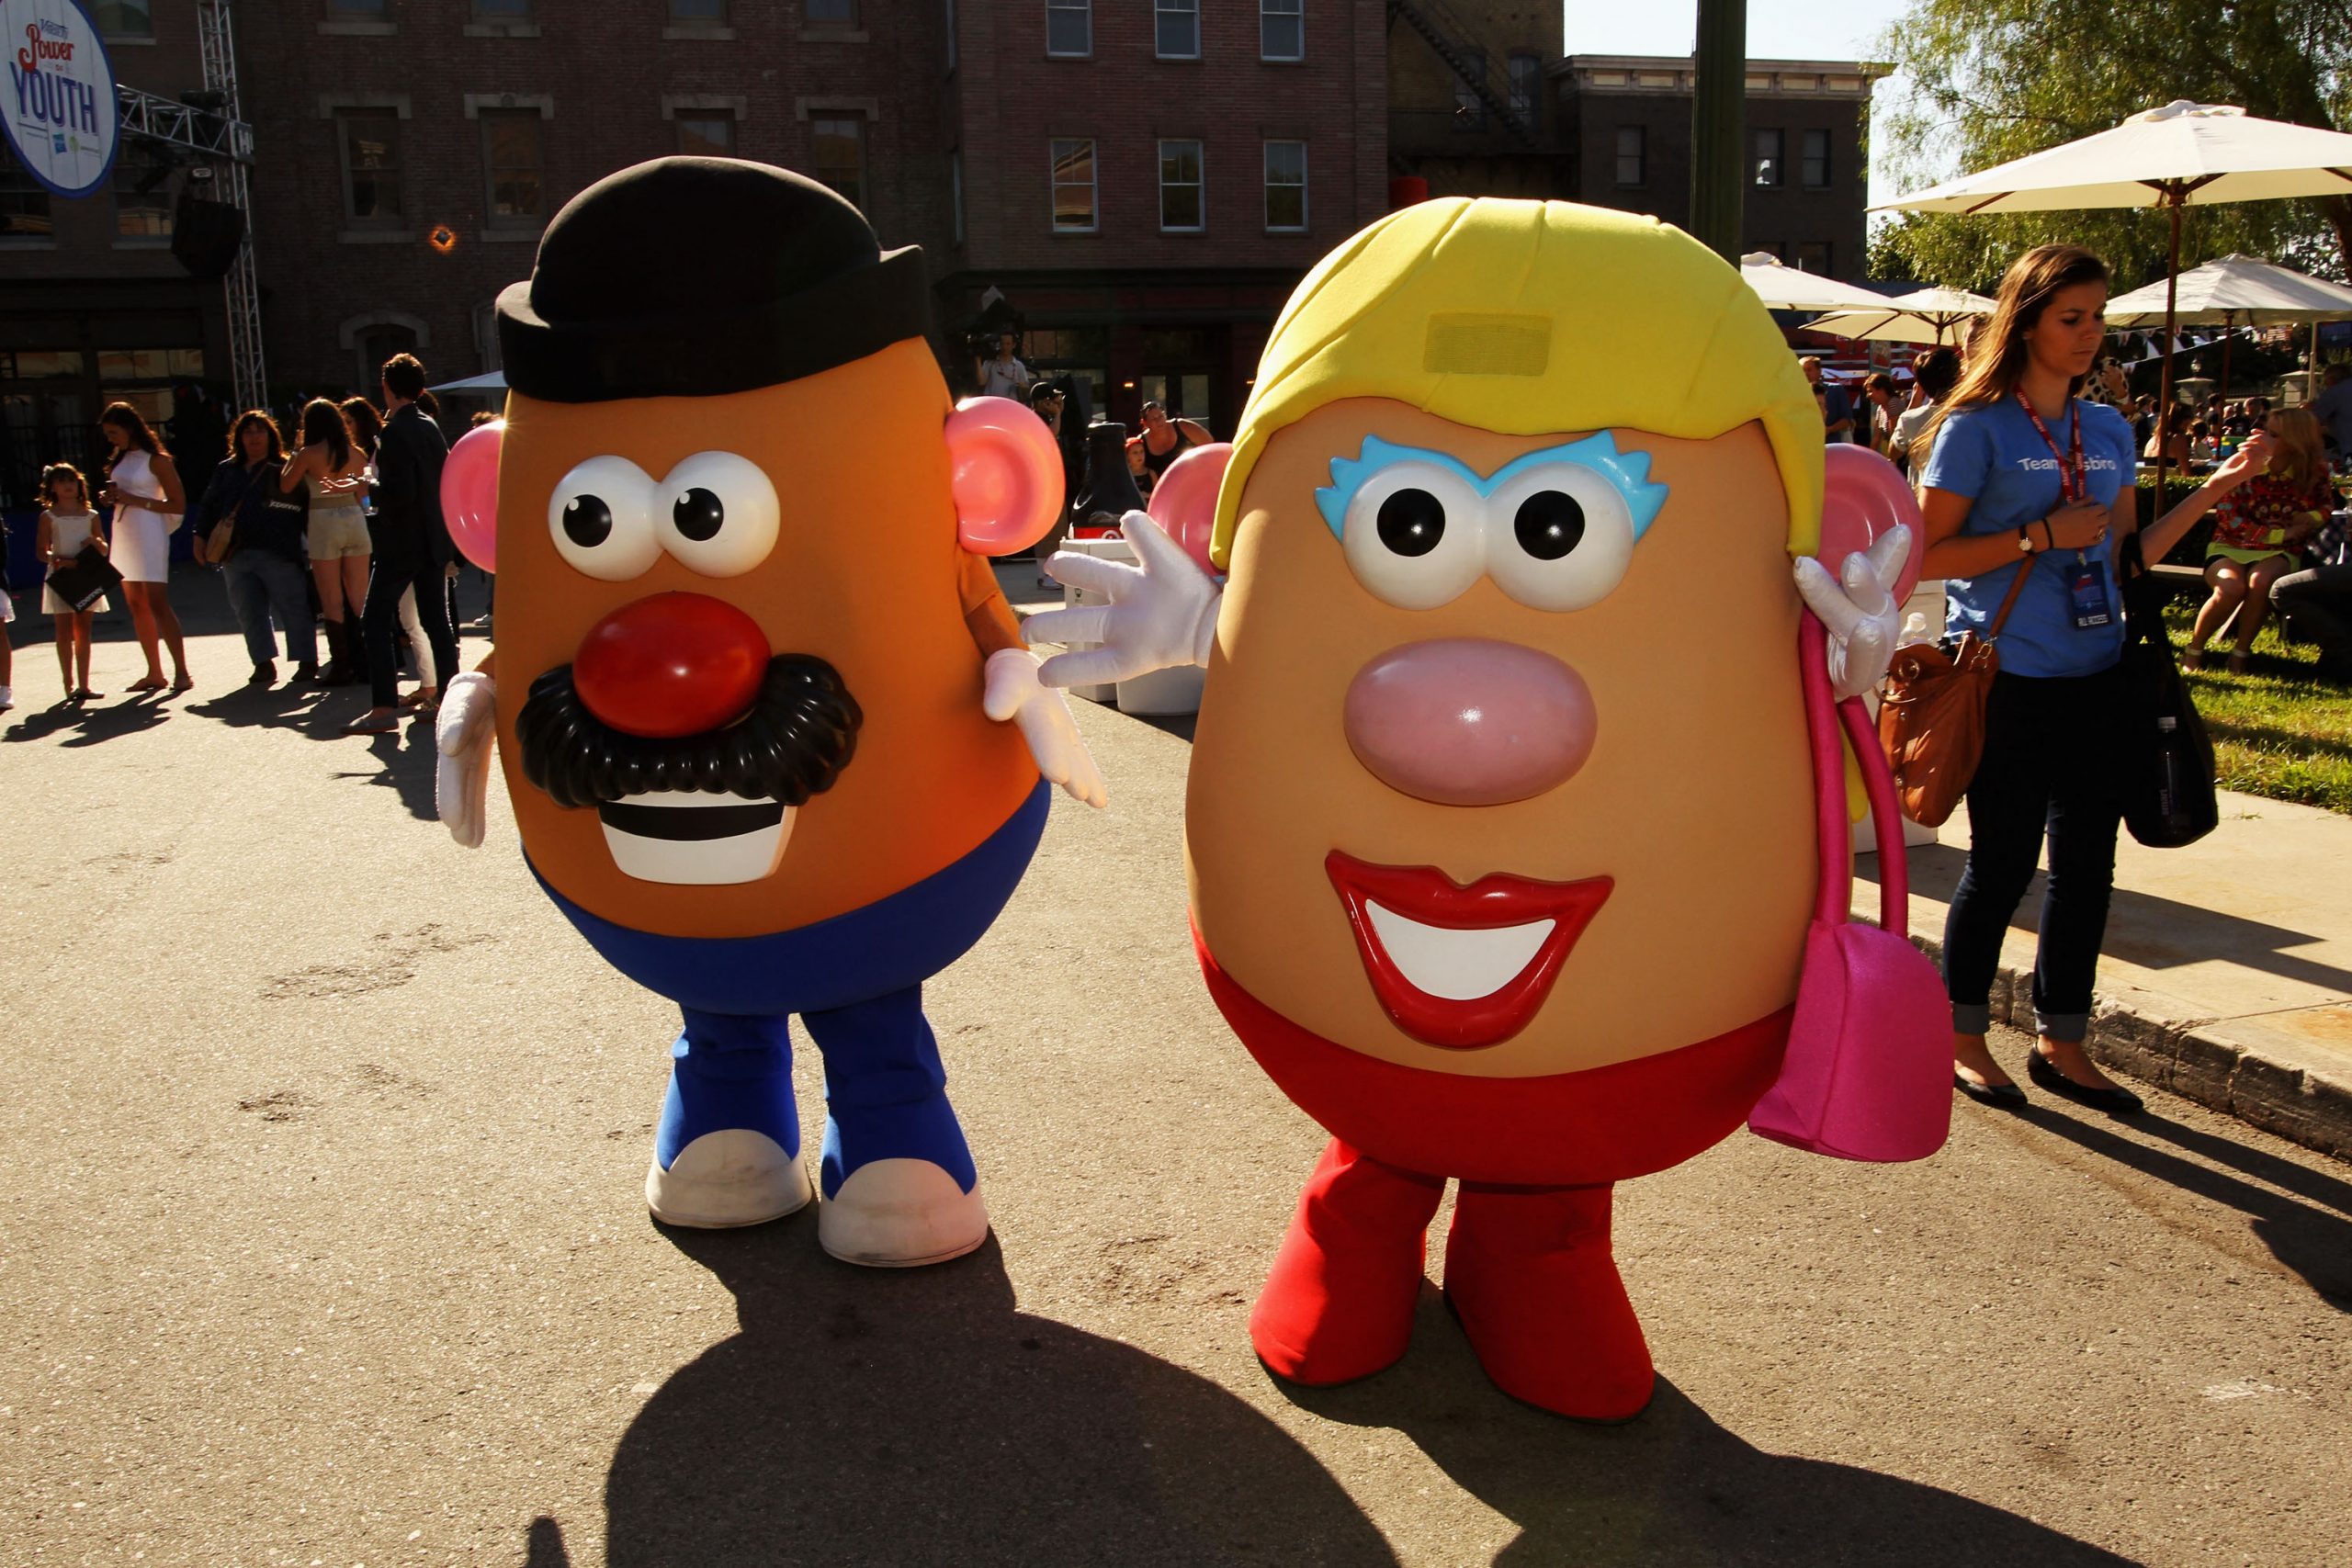 No more mister or missus: Iconic toy Potato Head goes gender neutral